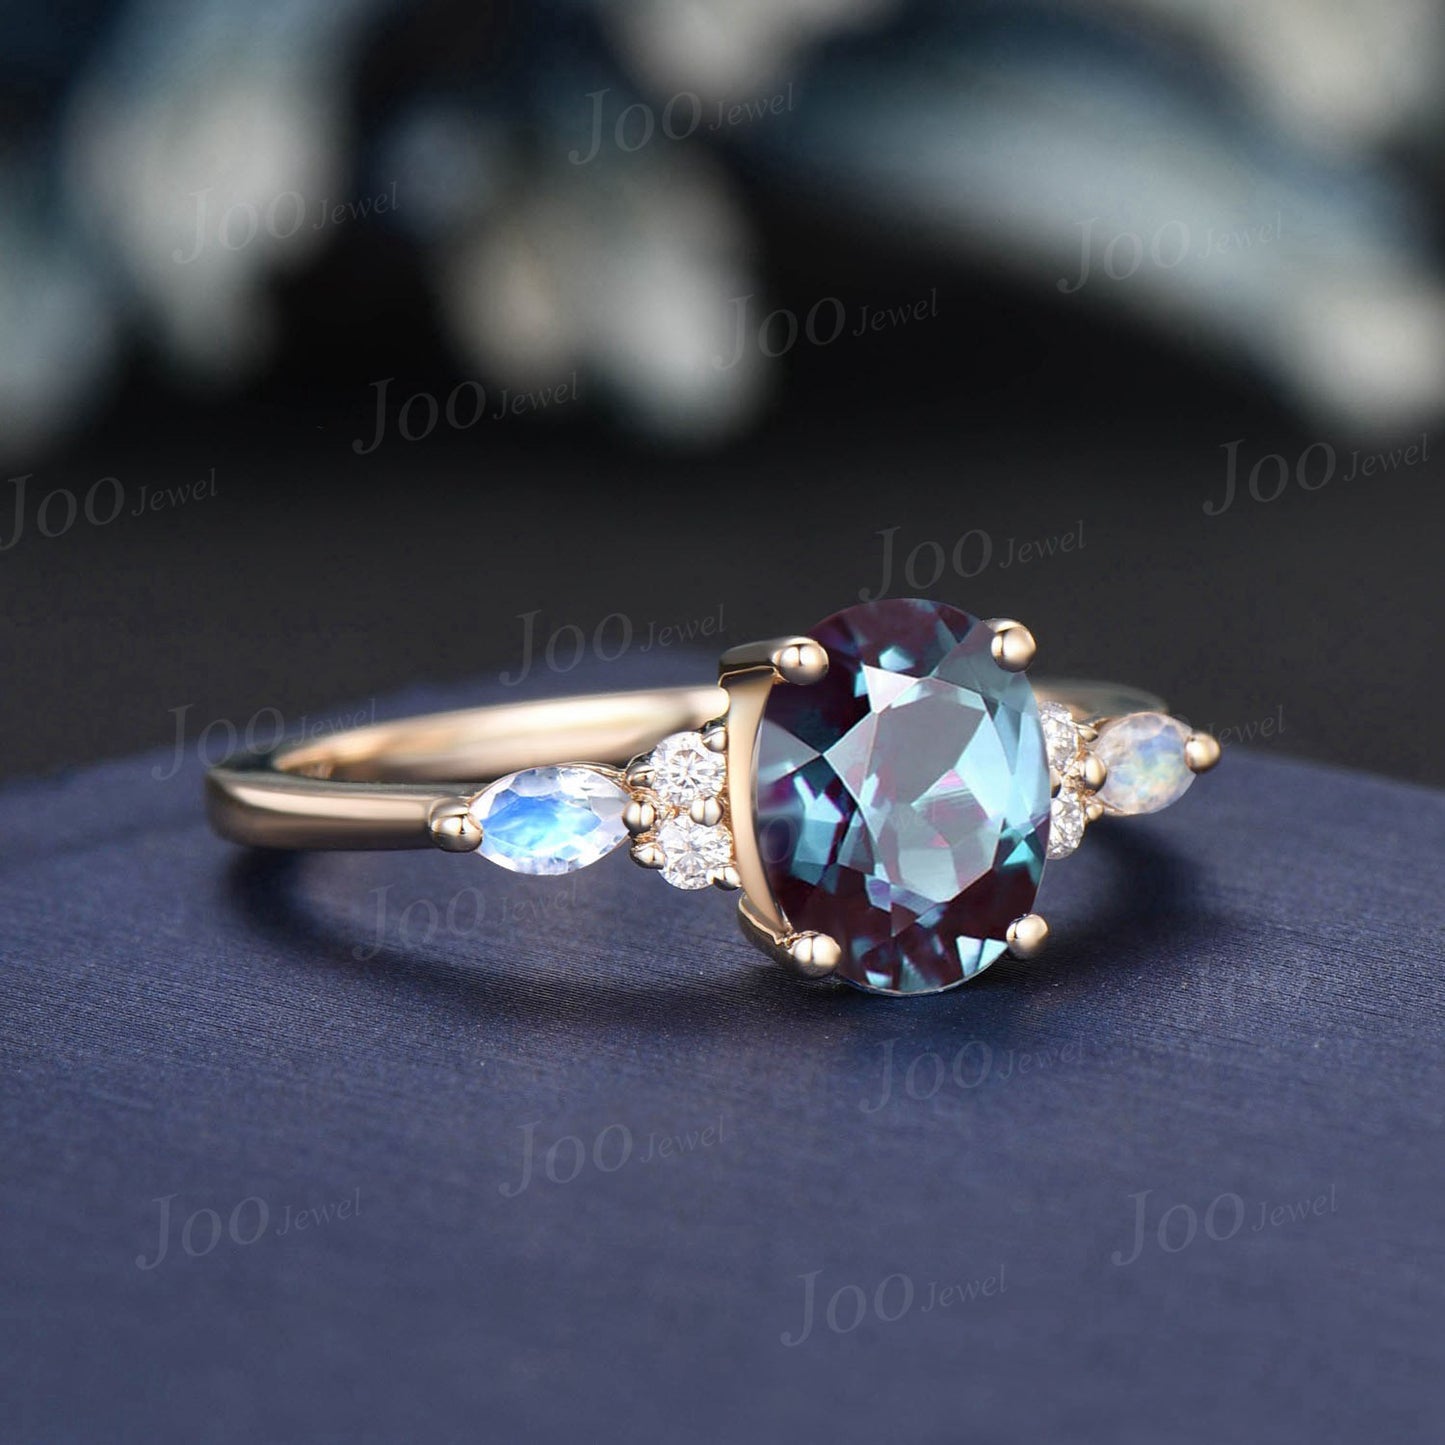 1.5ct Oval Alexandrite Ring Moonstone Cluster Engagement Ring Rose Gold June Birthstone Color Change Stone Unique Wedding Anniversary Gift